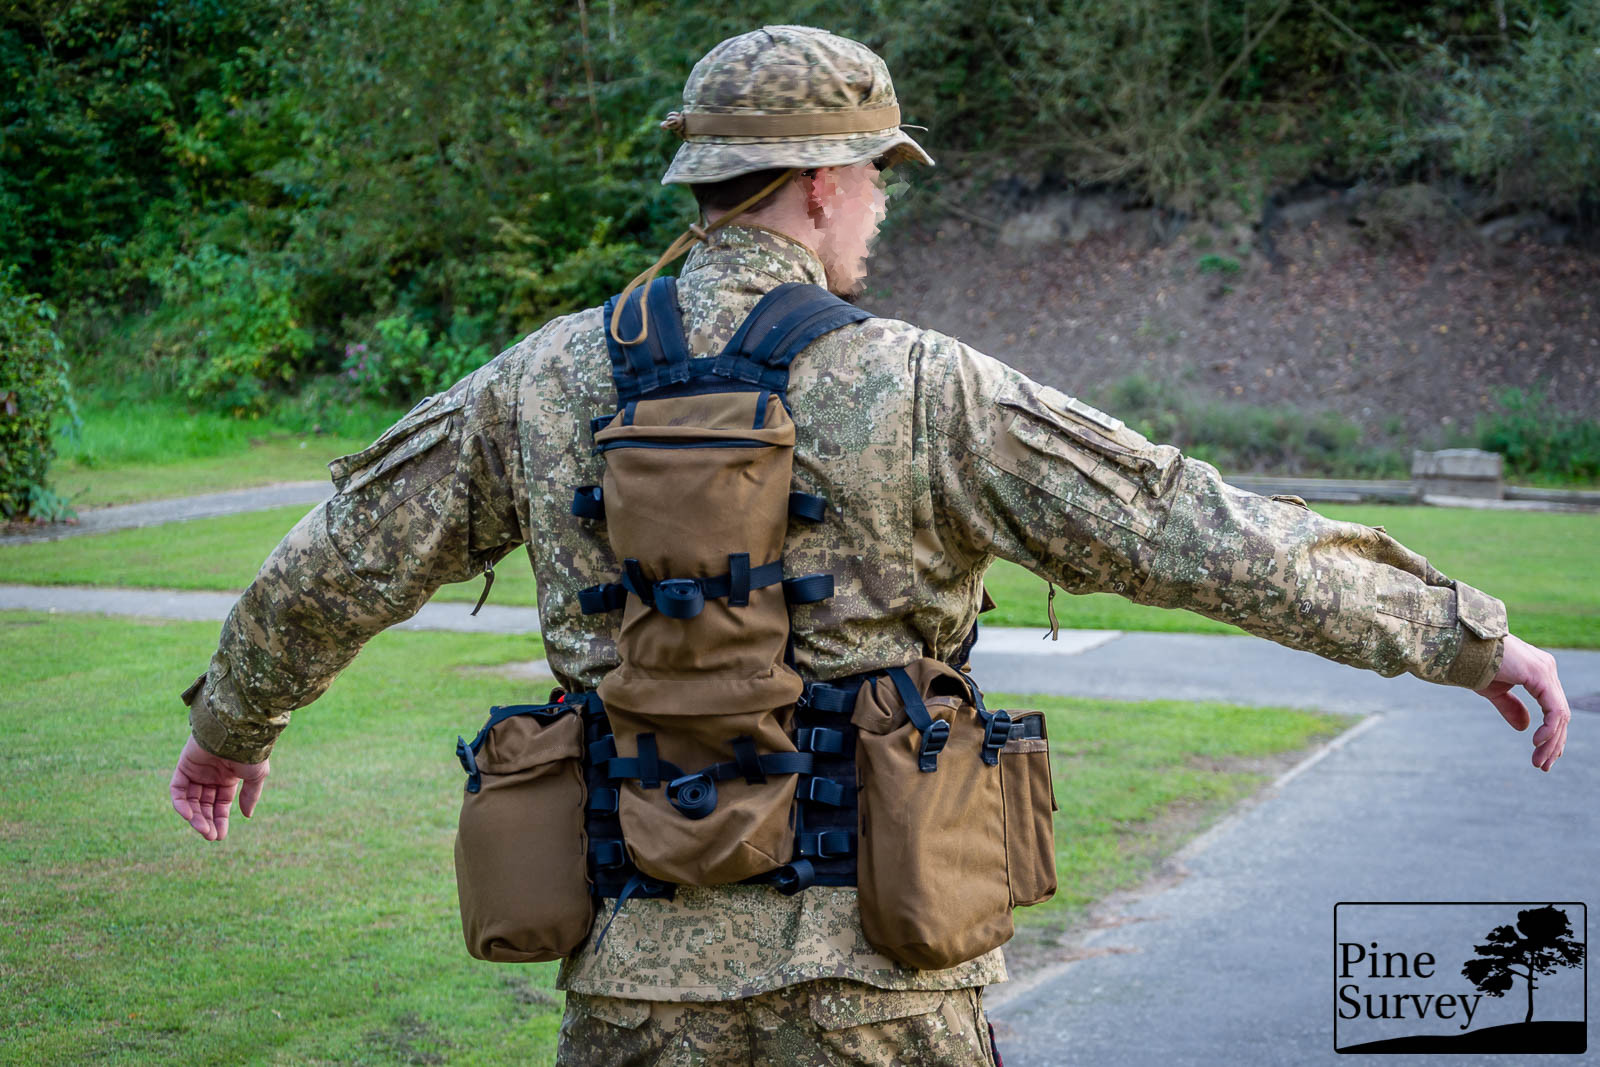 The backside of the P83 Vest, featuring the back pouches.